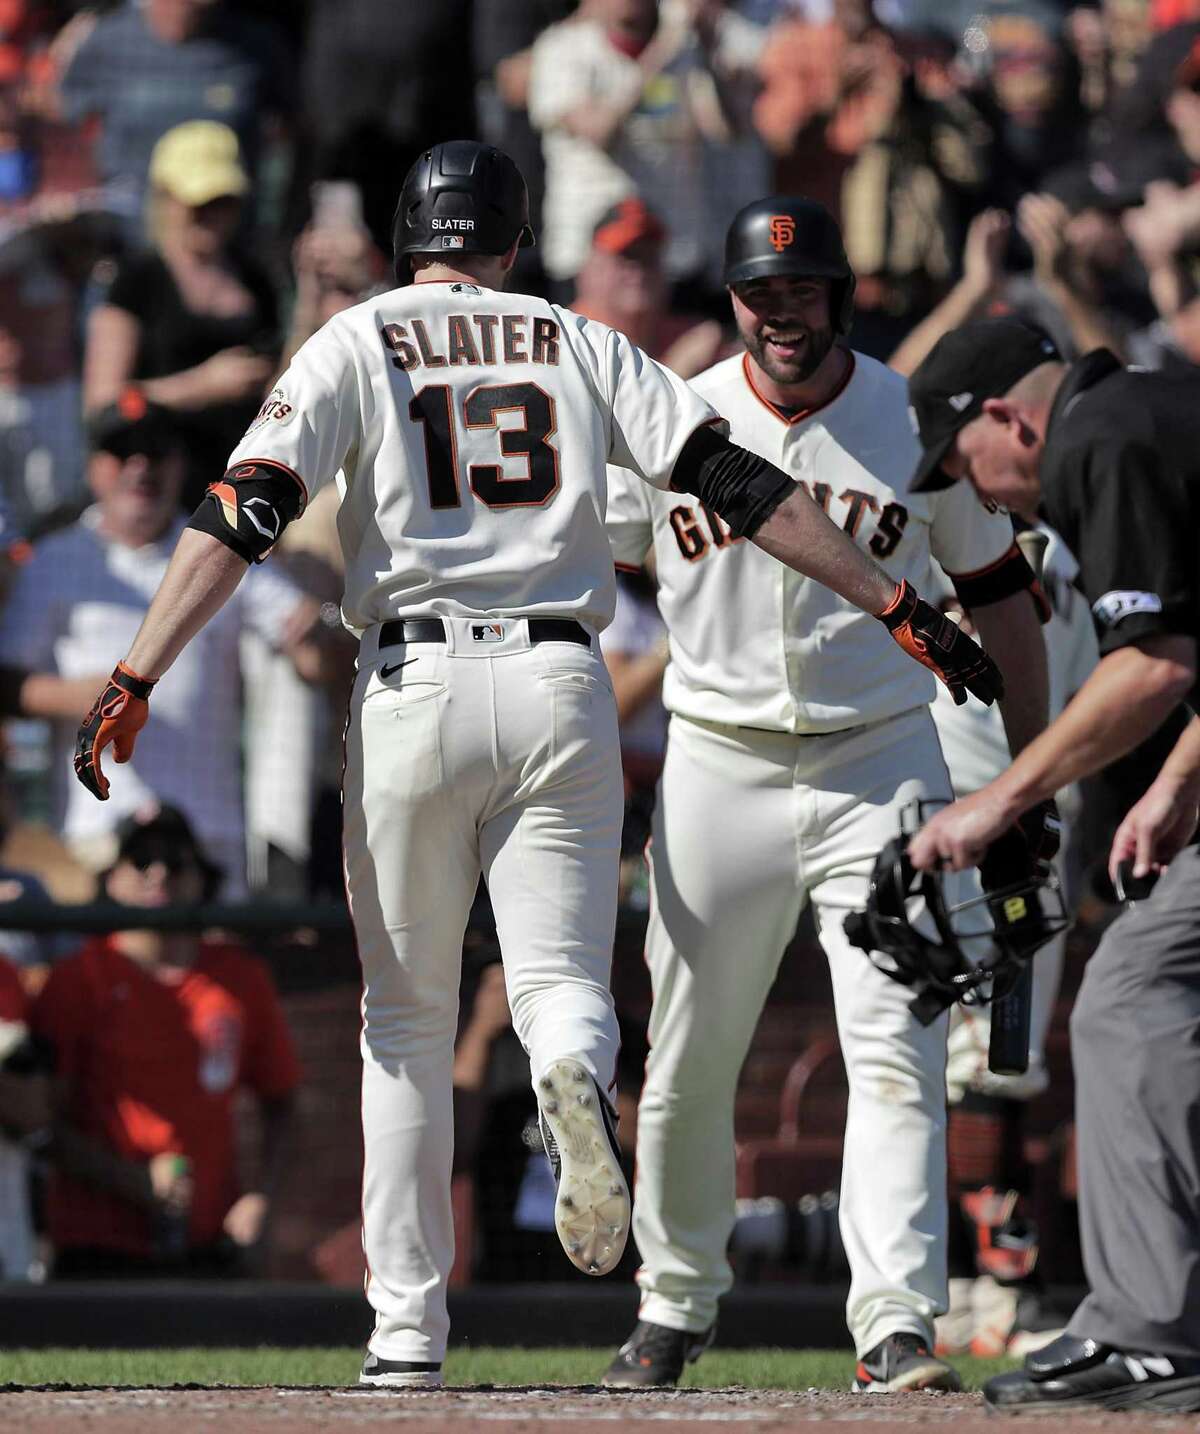 Austin Slater (13) scores on his solo homerun in the sixrth inning as the San Francisco Giants played the San Diego Padres at Oracle Park in San Francisco, Calif., on Saturday, October 2, 2021.